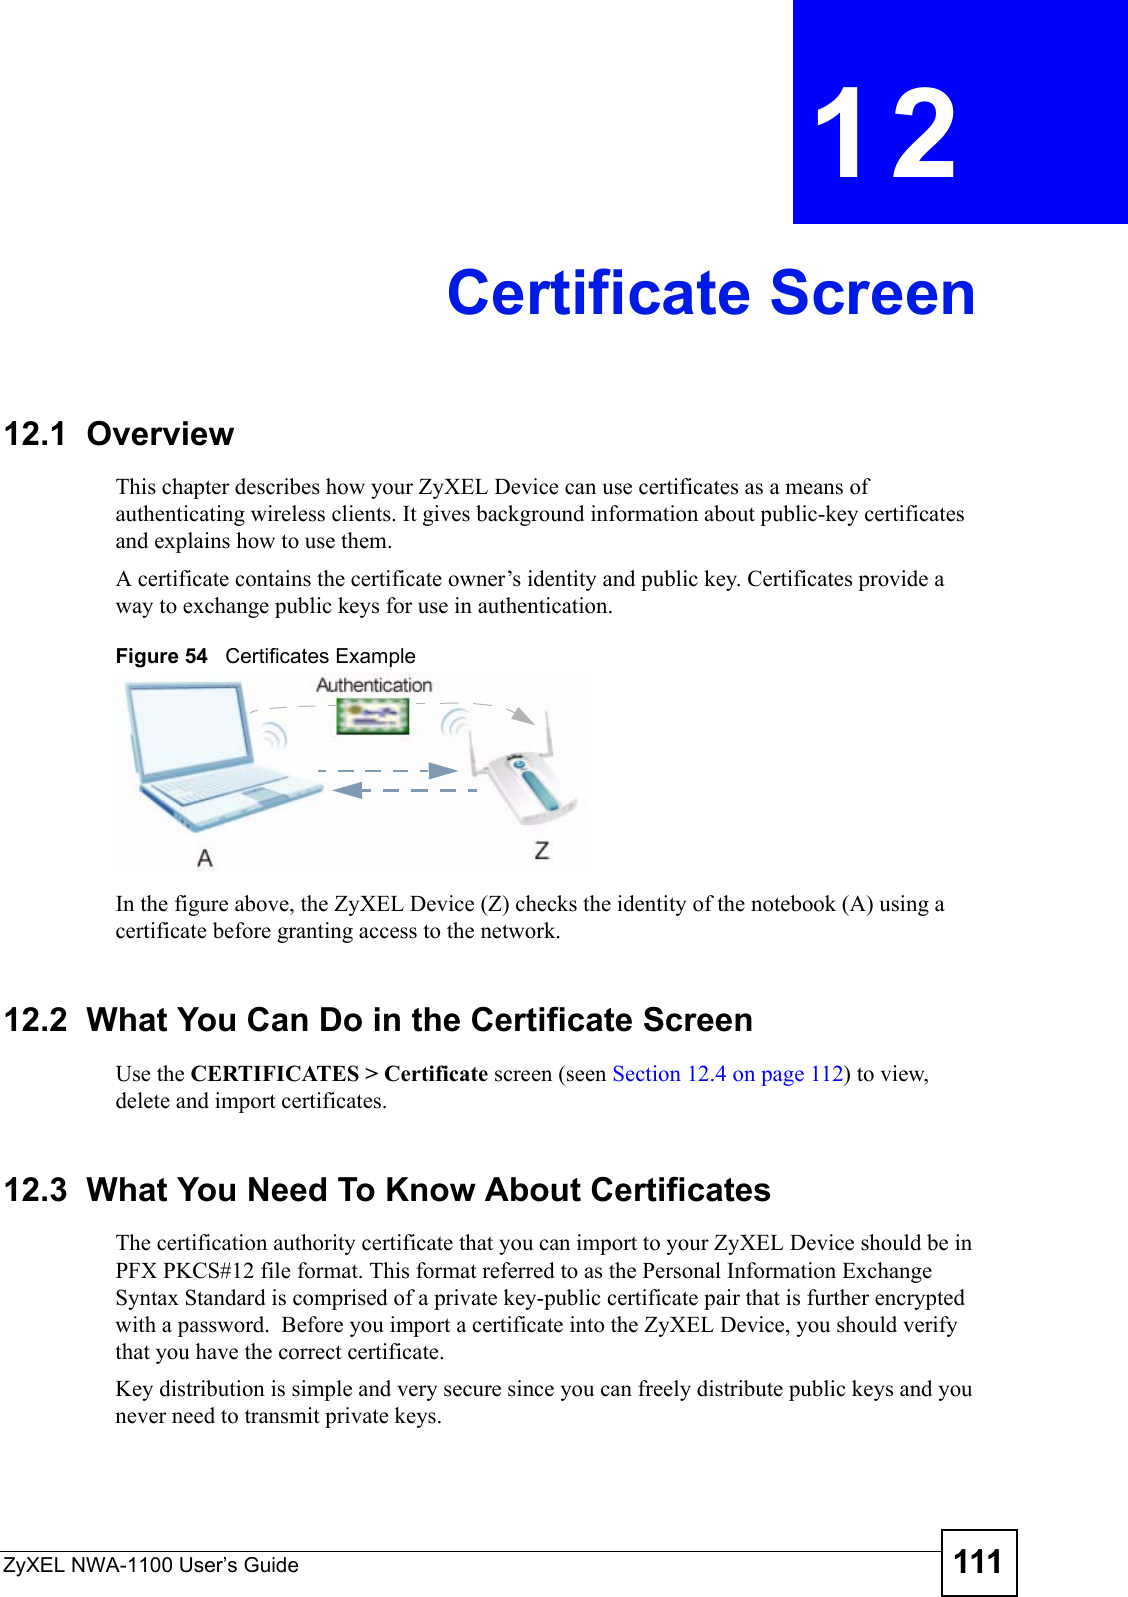 ZyXEL NWA-1100 User’s Guide 111CHAPTER  12 Certificate Screen12.1  OverviewThis chapter describes how your ZyXEL Device can use certificates as a means of authenticating wireless clients. It gives background information about public-key certificates and explains how to use them.A certificate contains the certificate owner’s identity and public key. Certificates provide a way to exchange public keys for use in authentication.Figure 54   Certificates ExampleIn the figure above, the ZyXEL Device (Z) checks the identity of the notebook (A) using a certificate before granting access to the network.12.2  What You Can Do in the Certificate ScreenUse the CERTIFICATES &gt; Certificate screen (seen Section 12.4 on page 112) to view, delete and import certificates.12.3  What You Need To Know About CertificatesThe certification authority certificate that you can import to your ZyXEL Device should be in PFX PKCS#12 file format. This format referred to as the Personal Information Exchange Syntax Standard is comprised of a private key-public certificate pair that is further encrypted with a password.  Before you import a certificate into the ZyXEL Device, you should verify that you have the correct certificate.Key distribution is simple and very secure since you can freely distribute public keys and you never need to transmit private keys.